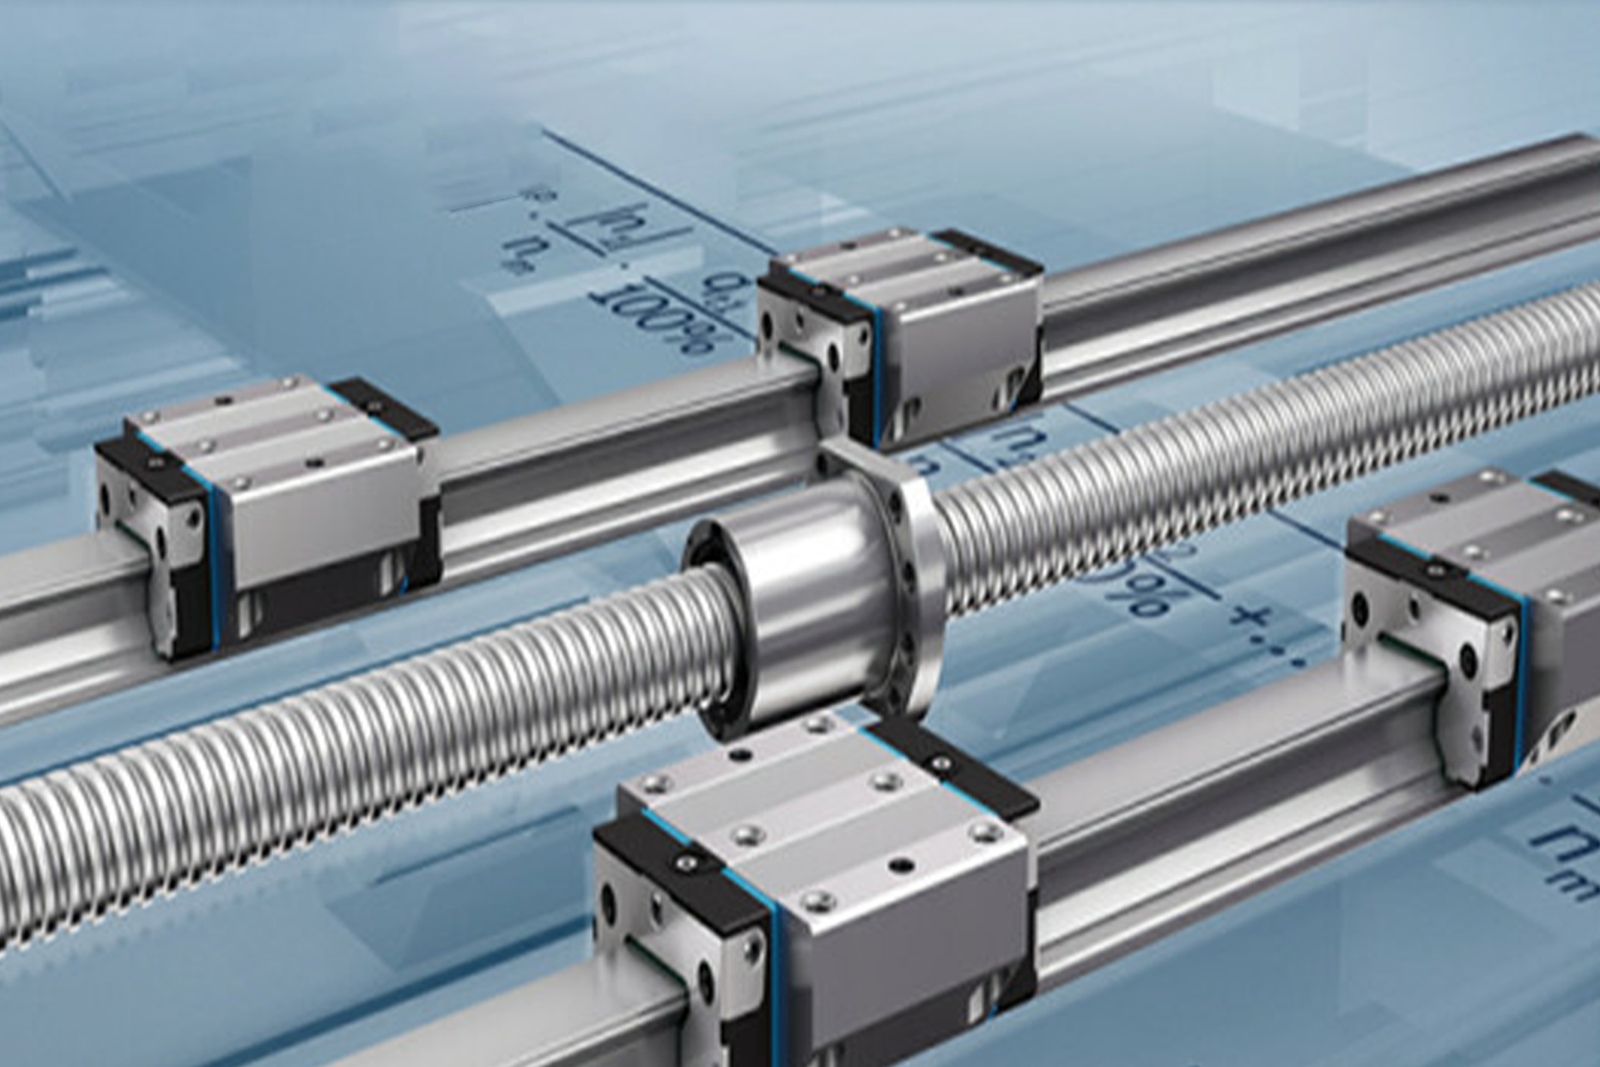 How to Mount a Linear Actuator